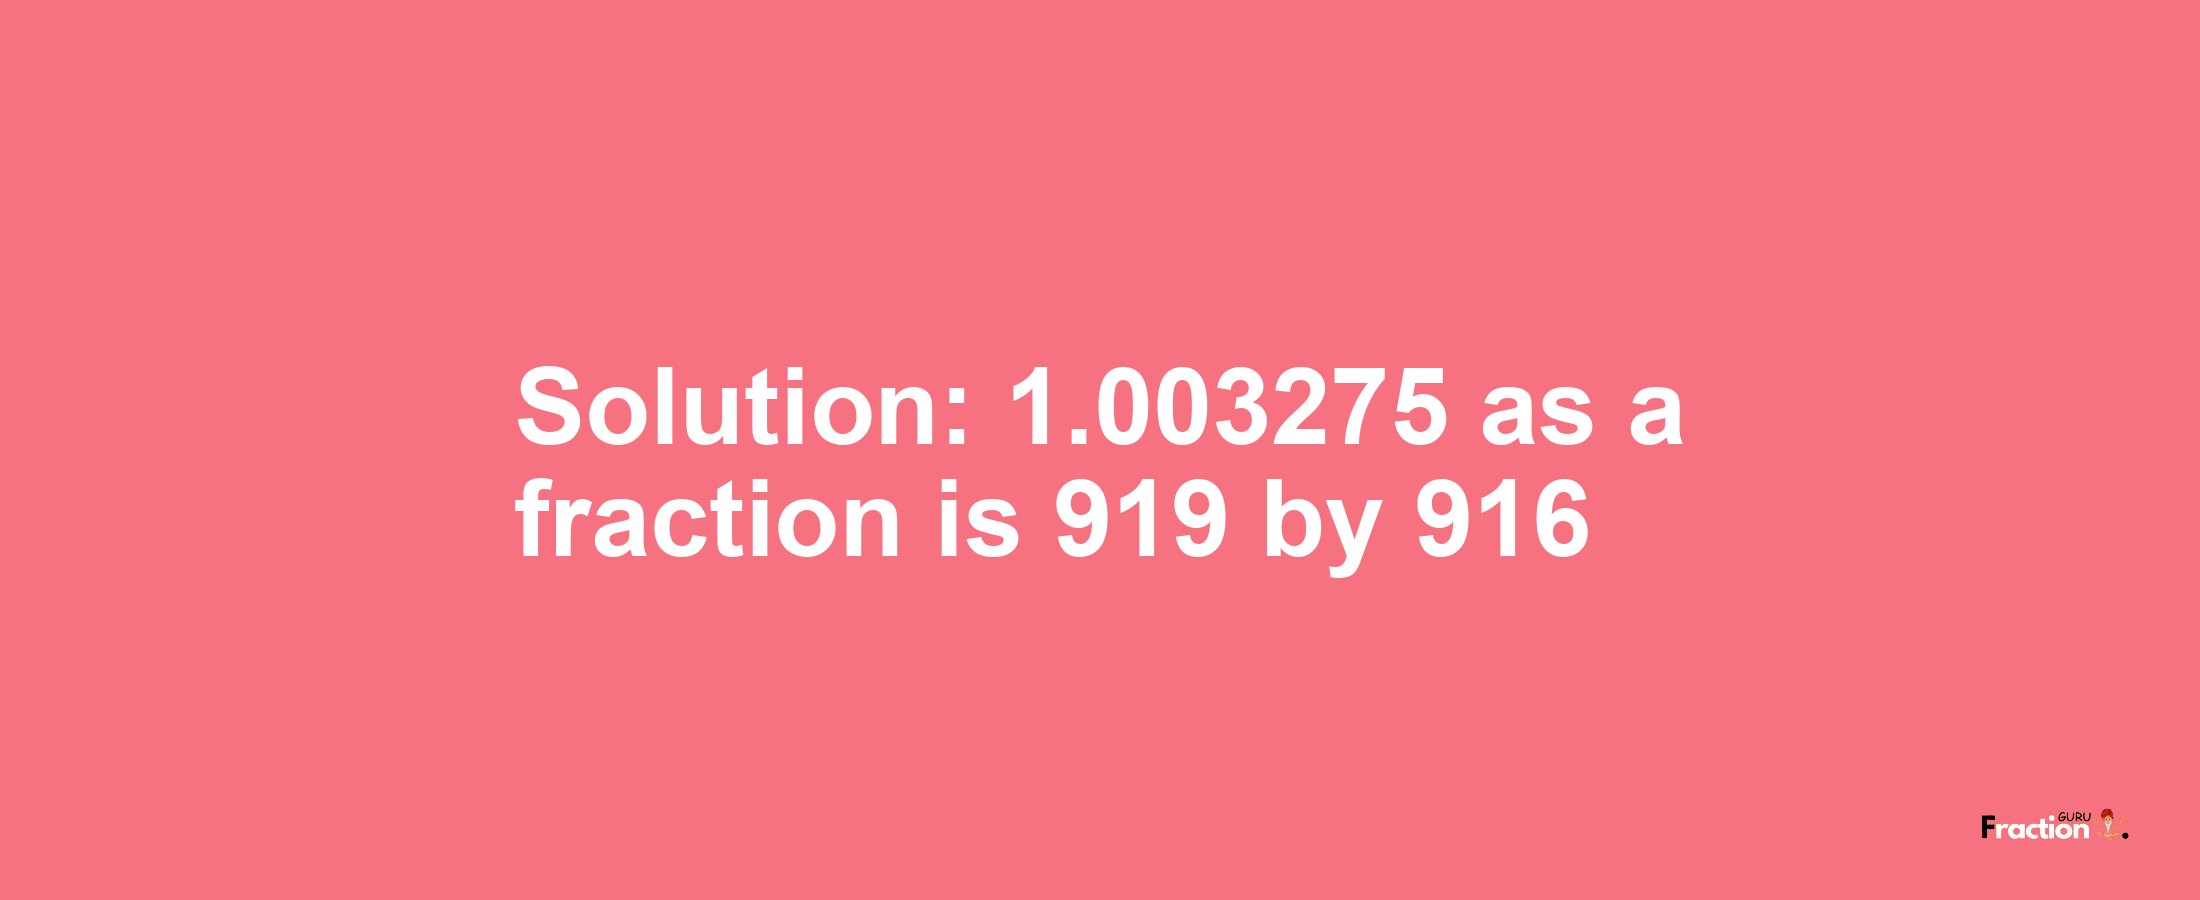 Solution:1.003275 as a fraction is 919/916